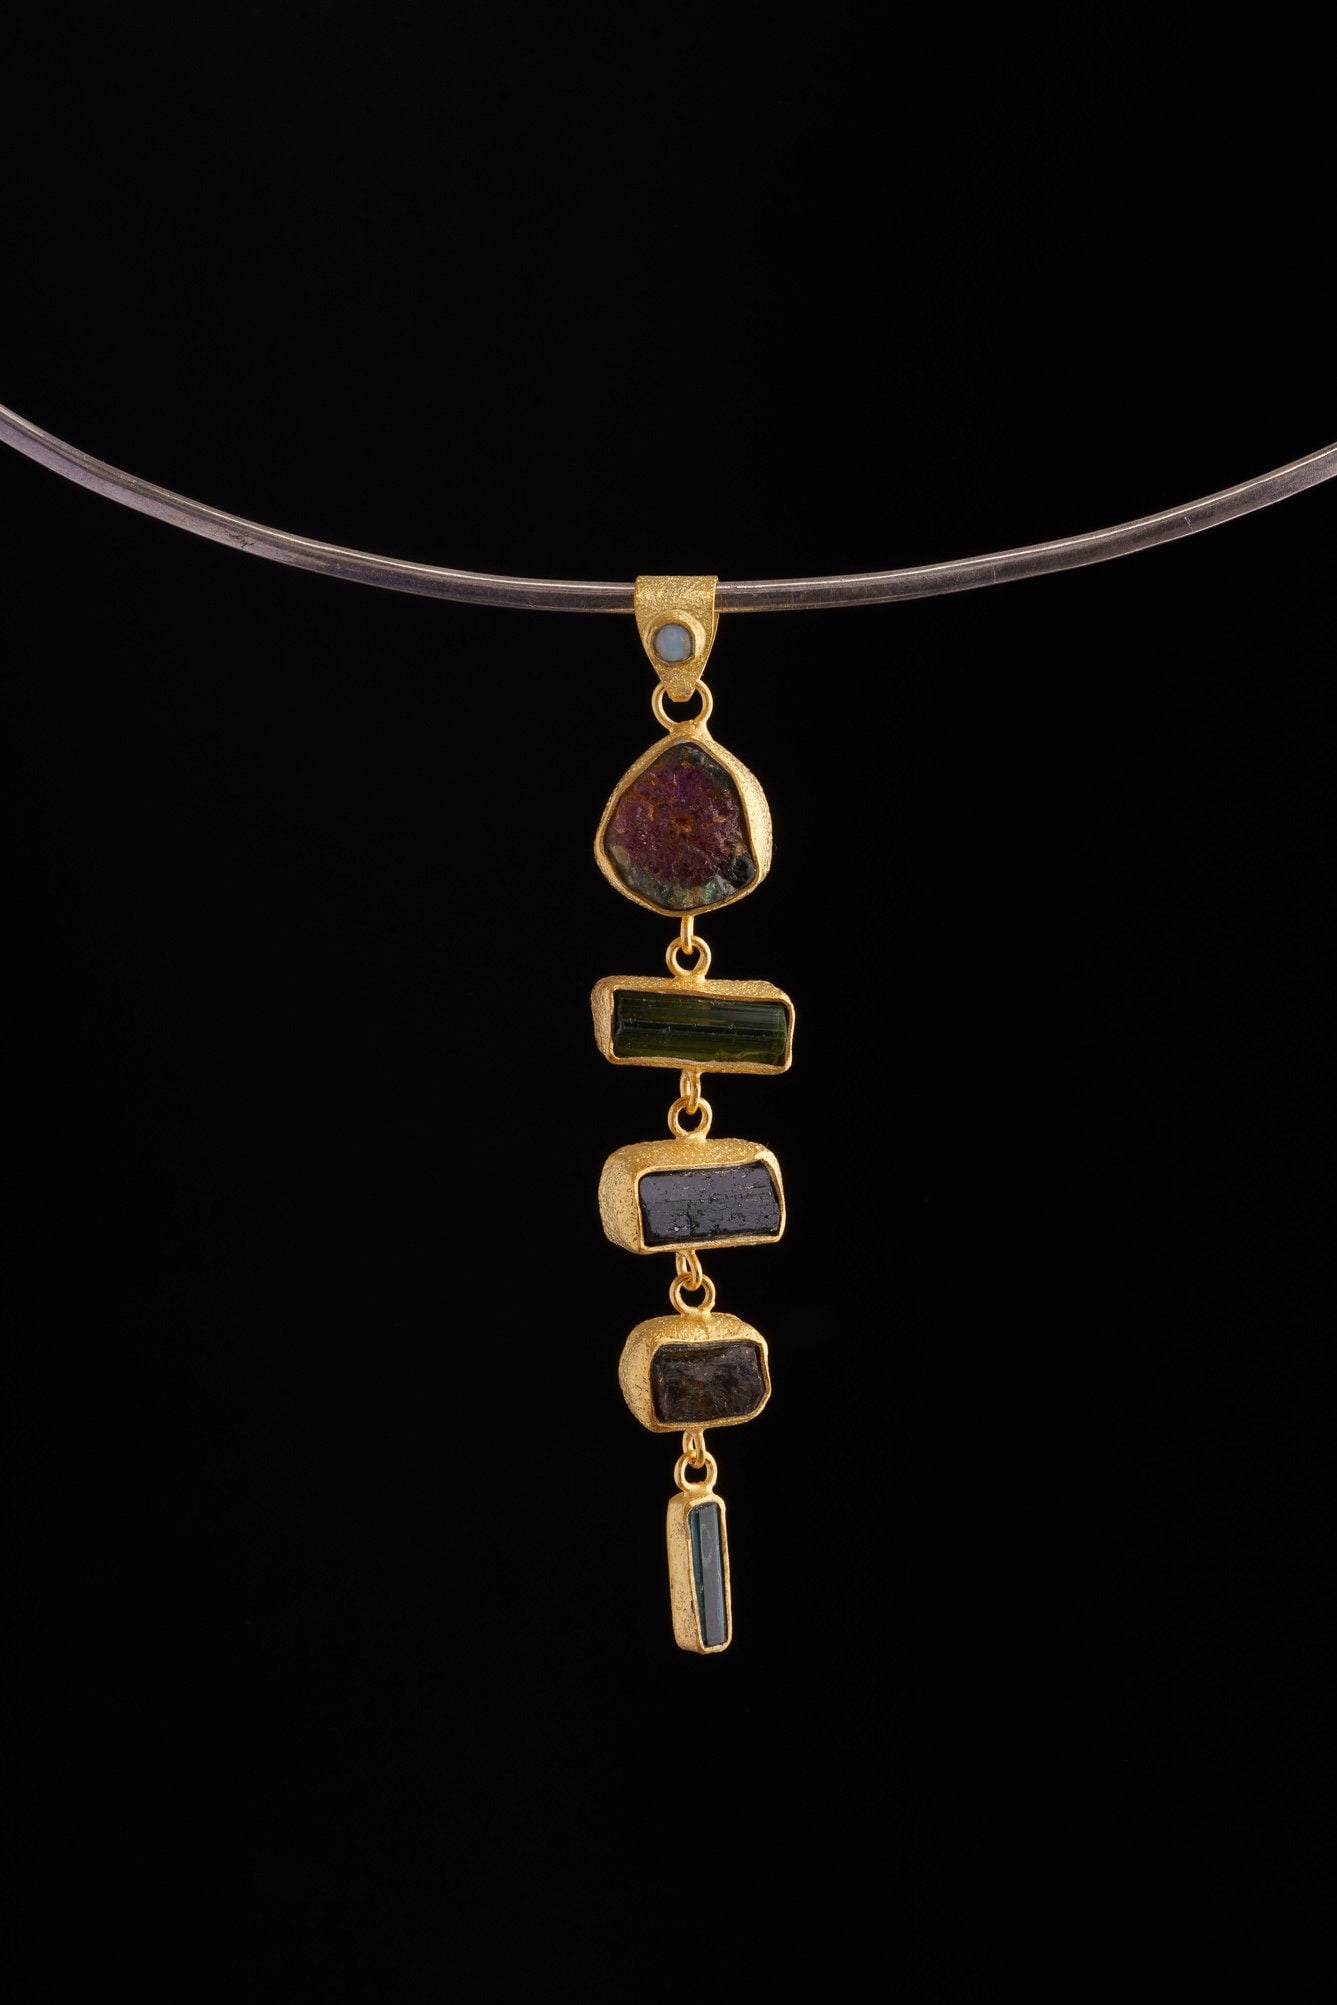 Rainbow Tourmaline Pendant in Textured 18 Carat Gold-Plated Sterling Silver, Six Unique Gemmy Tourmaline Crystals, Dangling Gold Charm